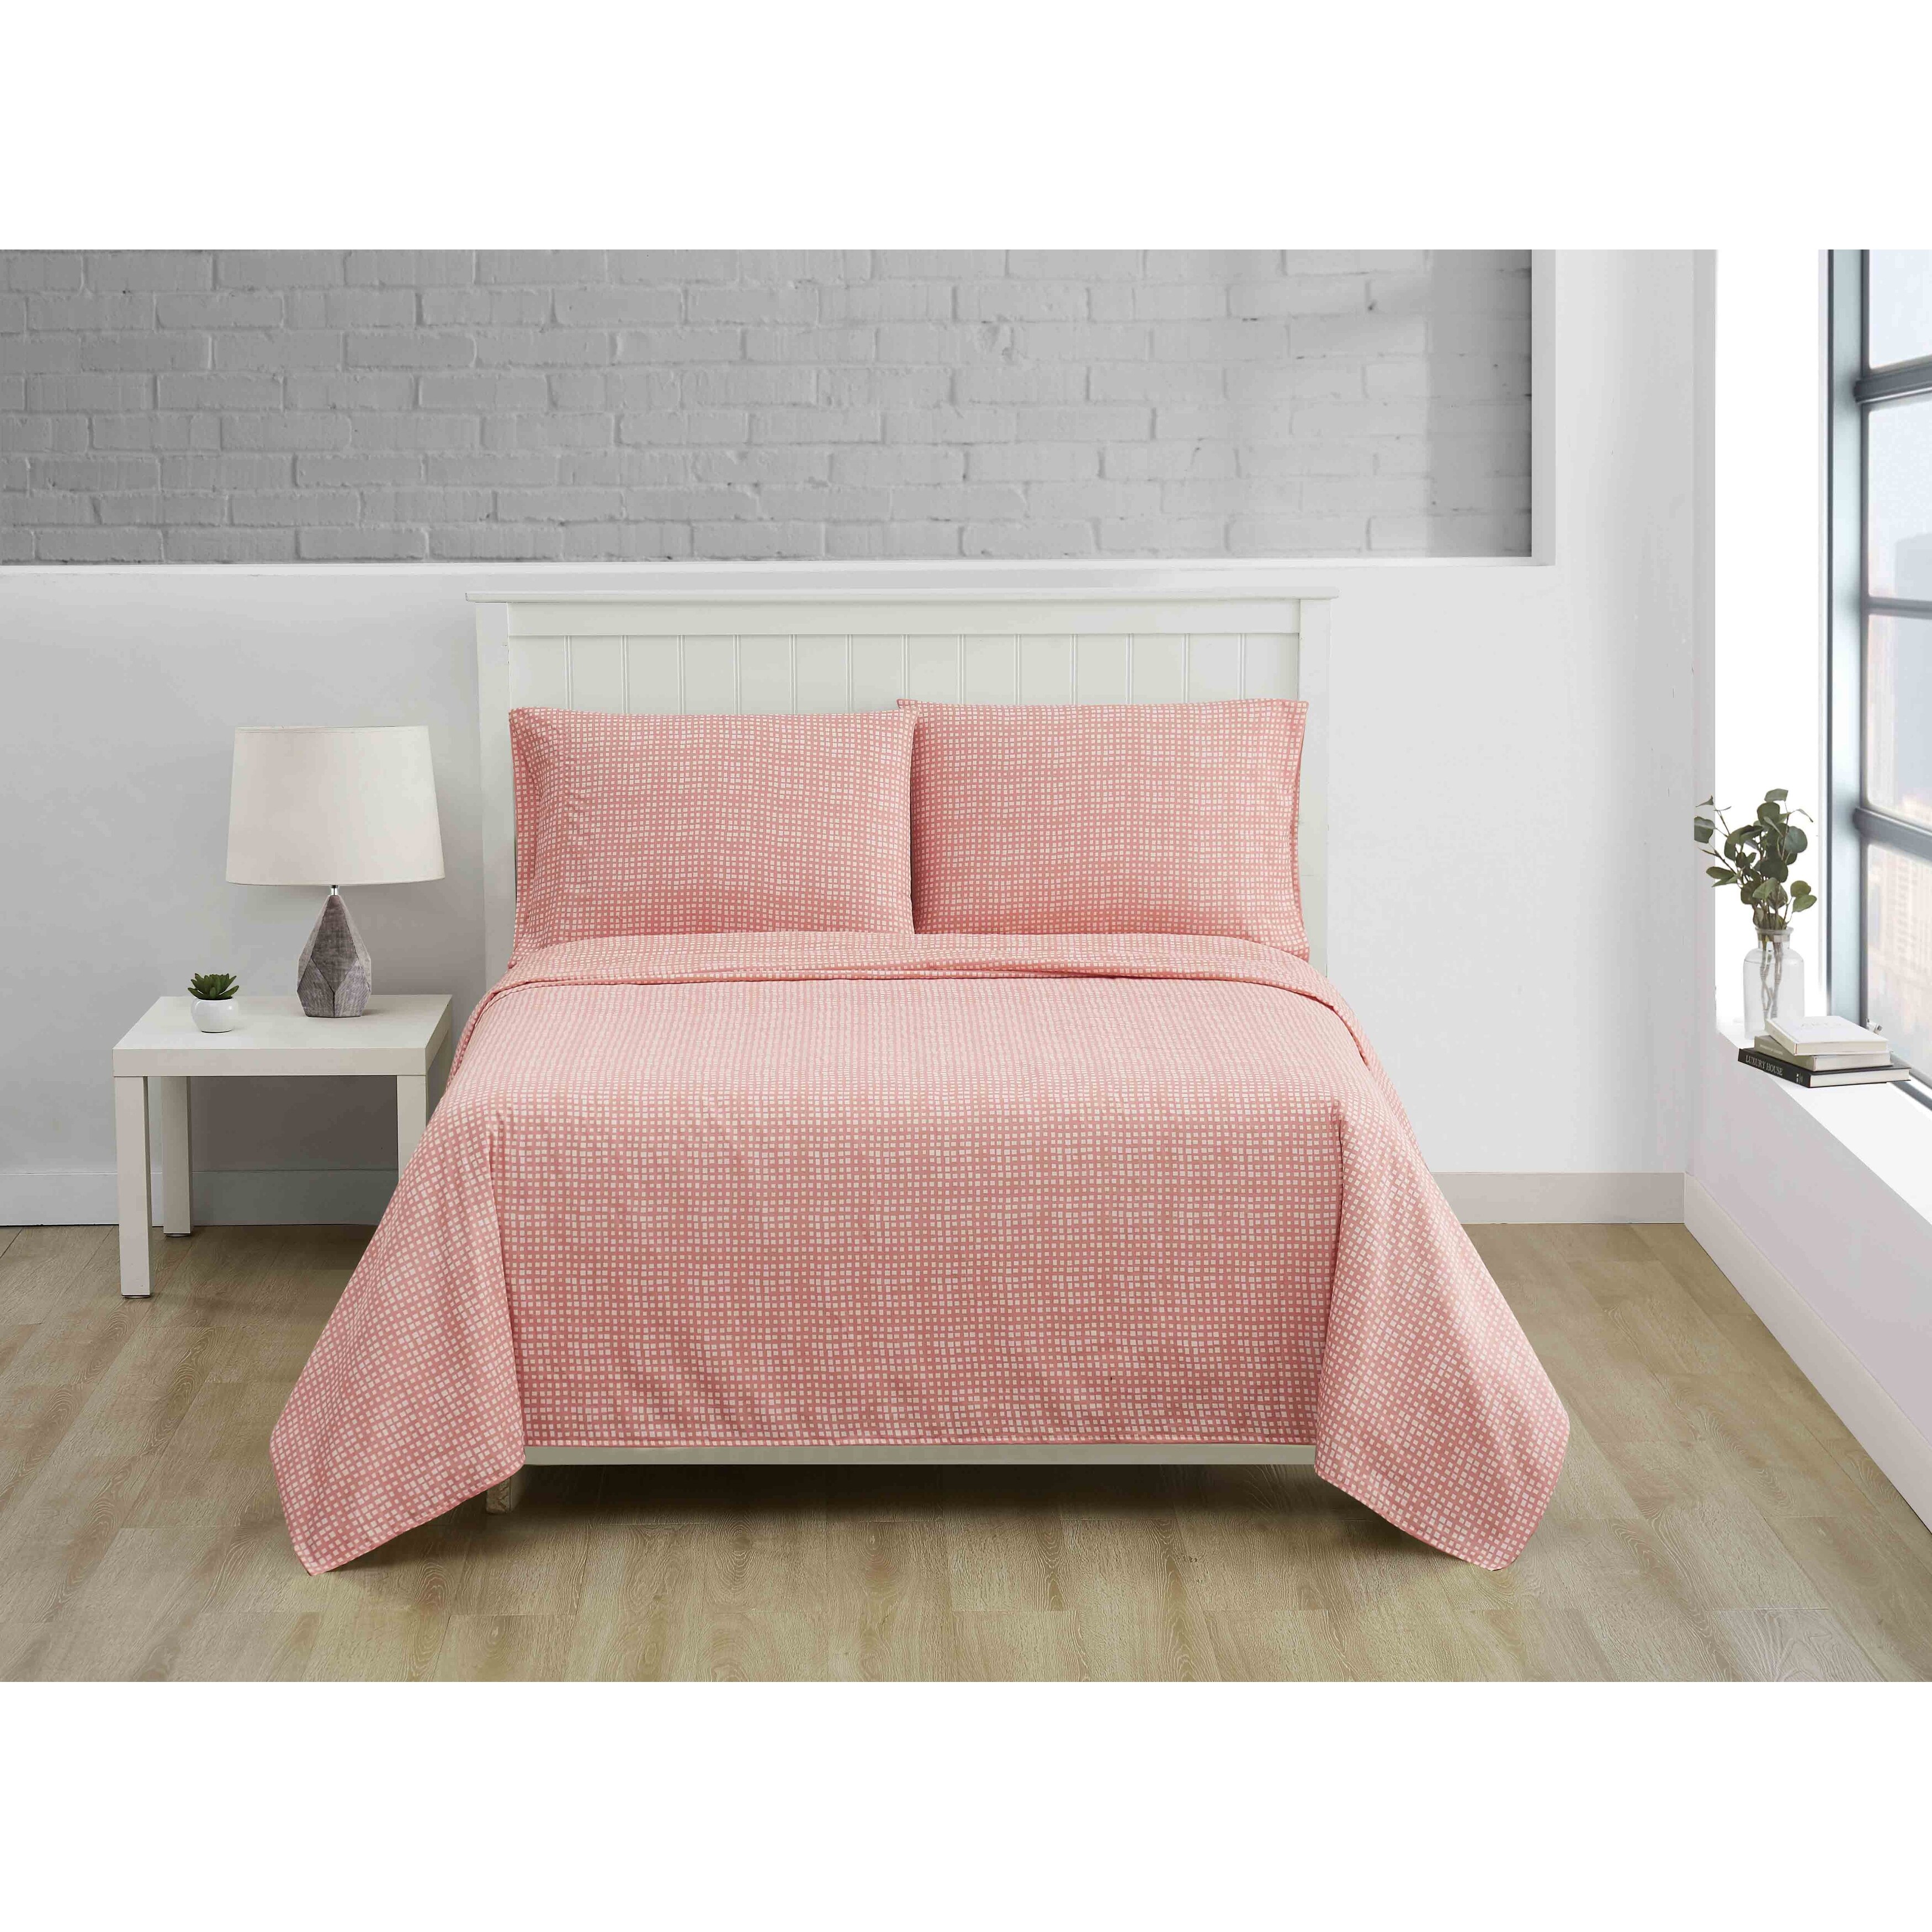 Microfiber Sheet Set and Pillowcases - On Sale - Bed Bath & Beyond -  38934321